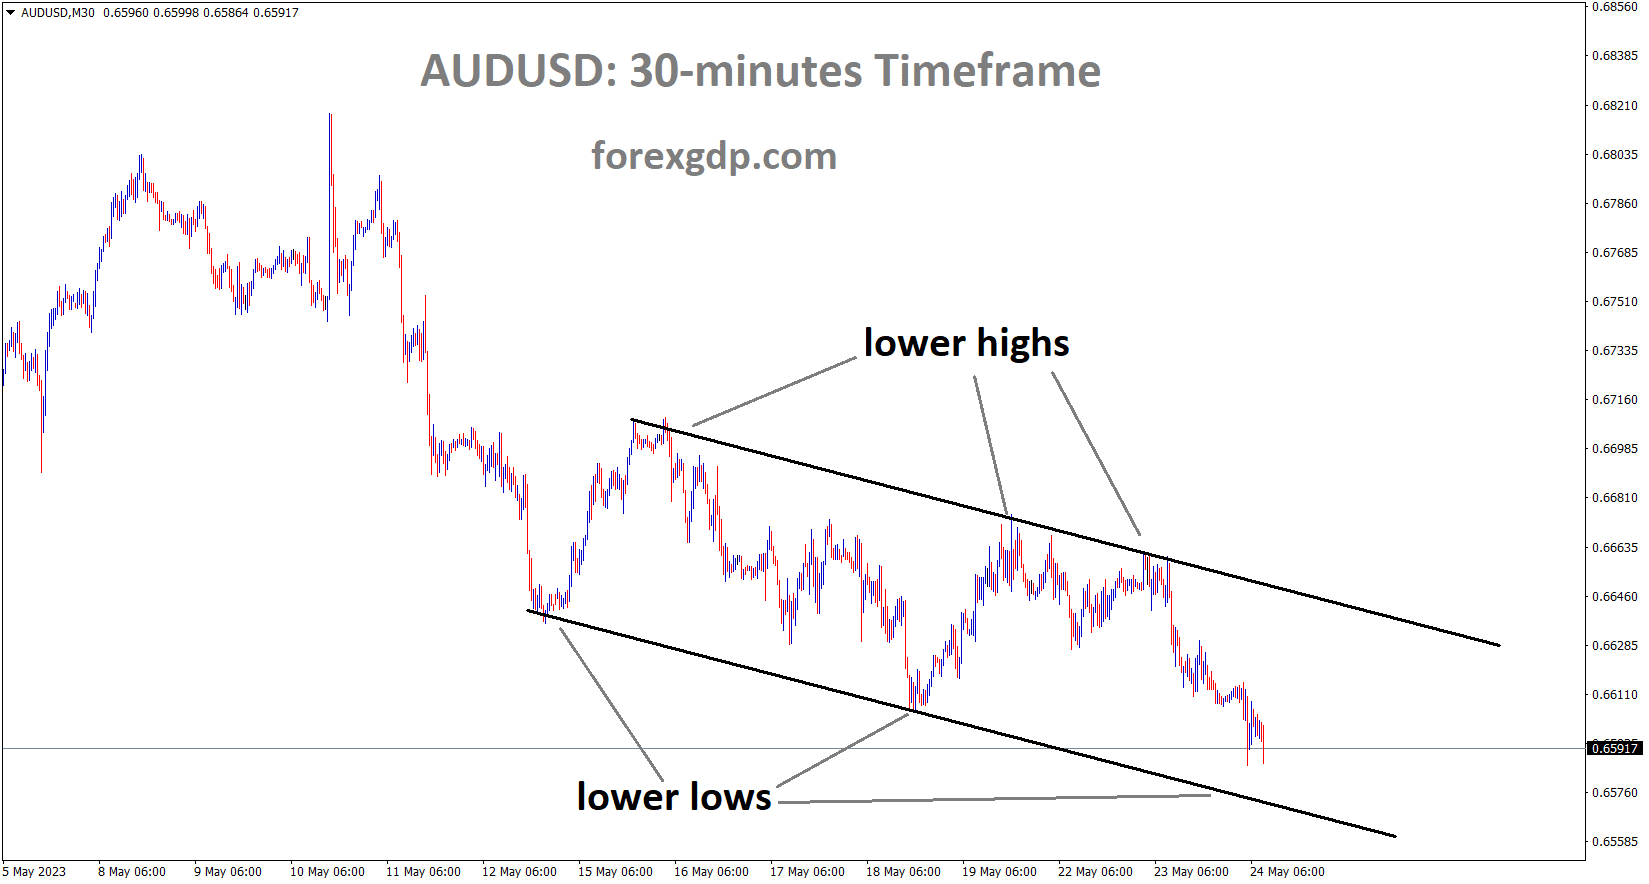 AUDUSD M30 TF analysis Market is moving in the Descending channel and the market has reached the lower low area of the channel